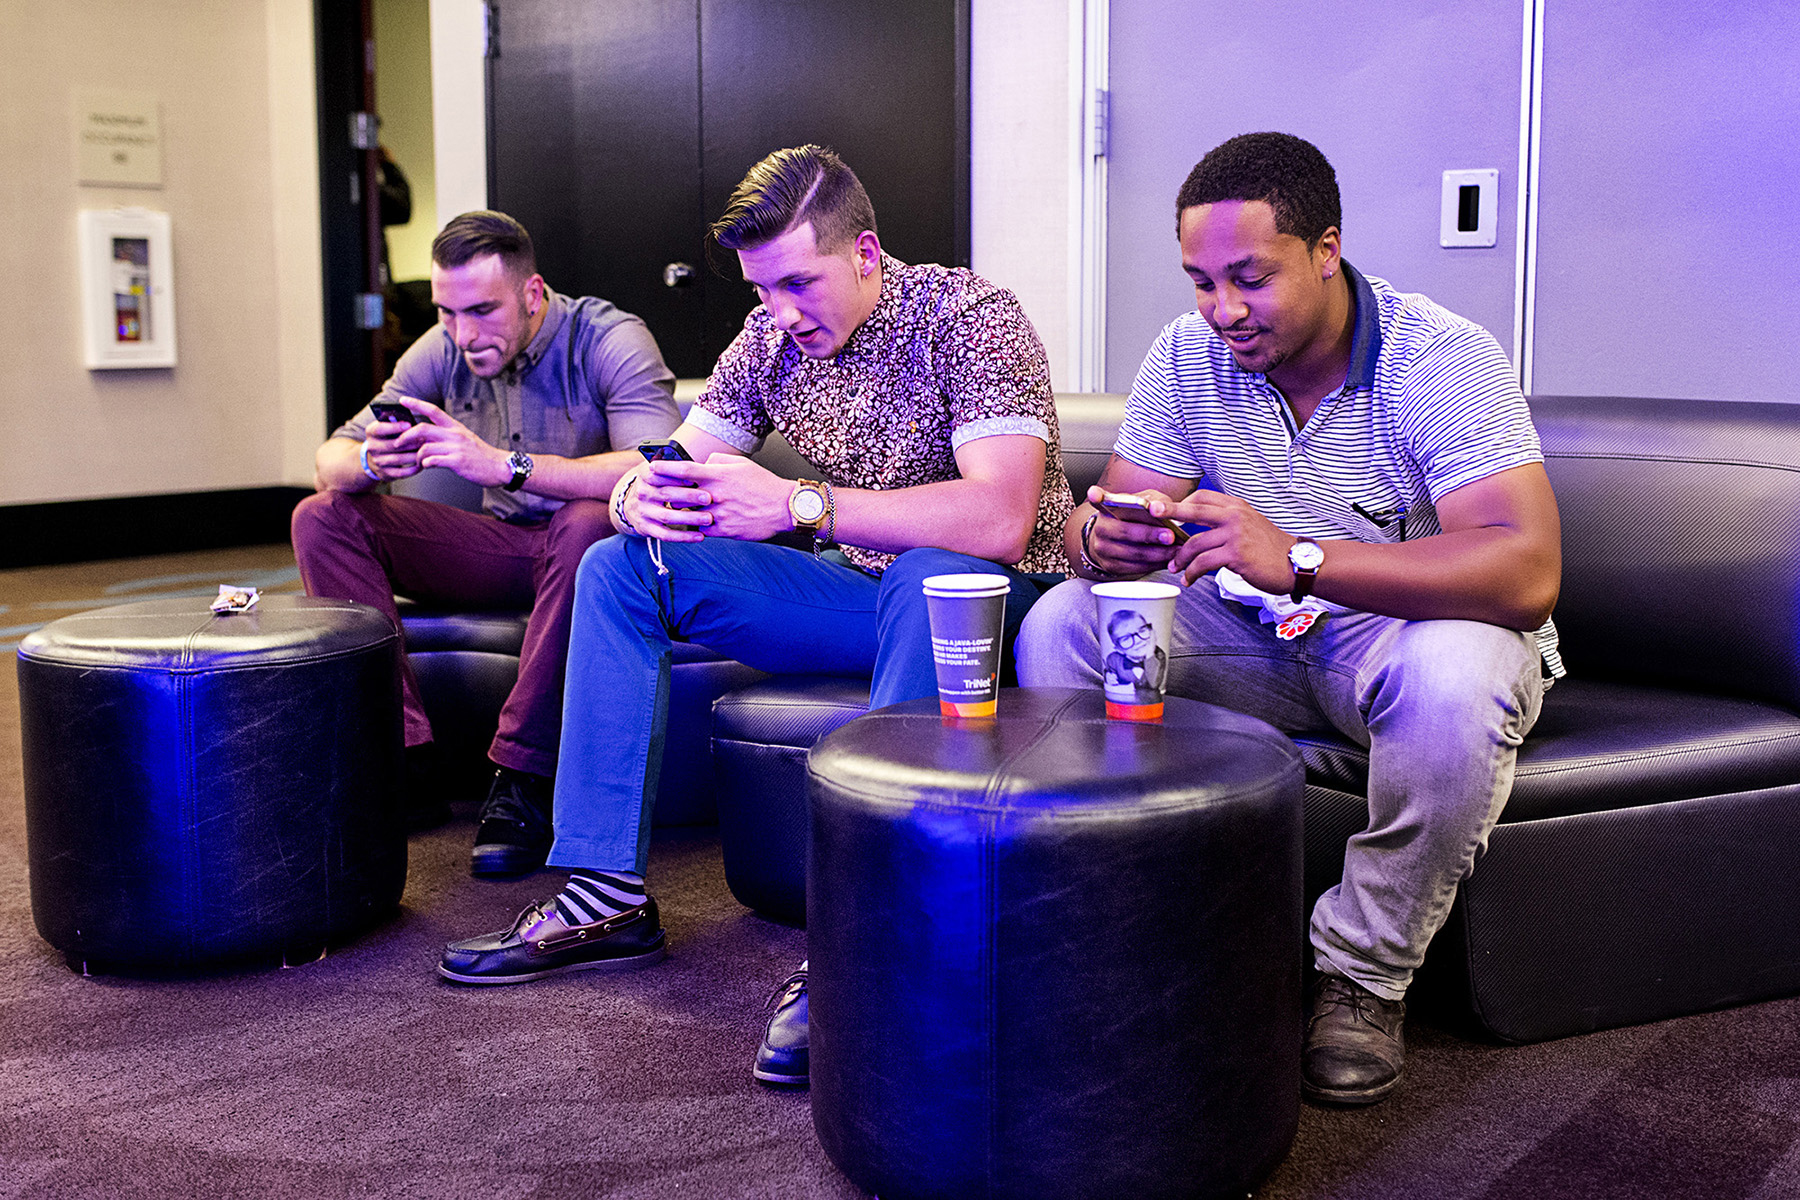 Danny Lizotte, Tim Lizotte and Colton Walker, seem left to right, check their phones while attending the Startup and Tech Mixer in support of a friend who was launching a job app at the event in San Francisco, California in August 2014. The networking event was for a time held once every few months and drew hundreds of attendees.